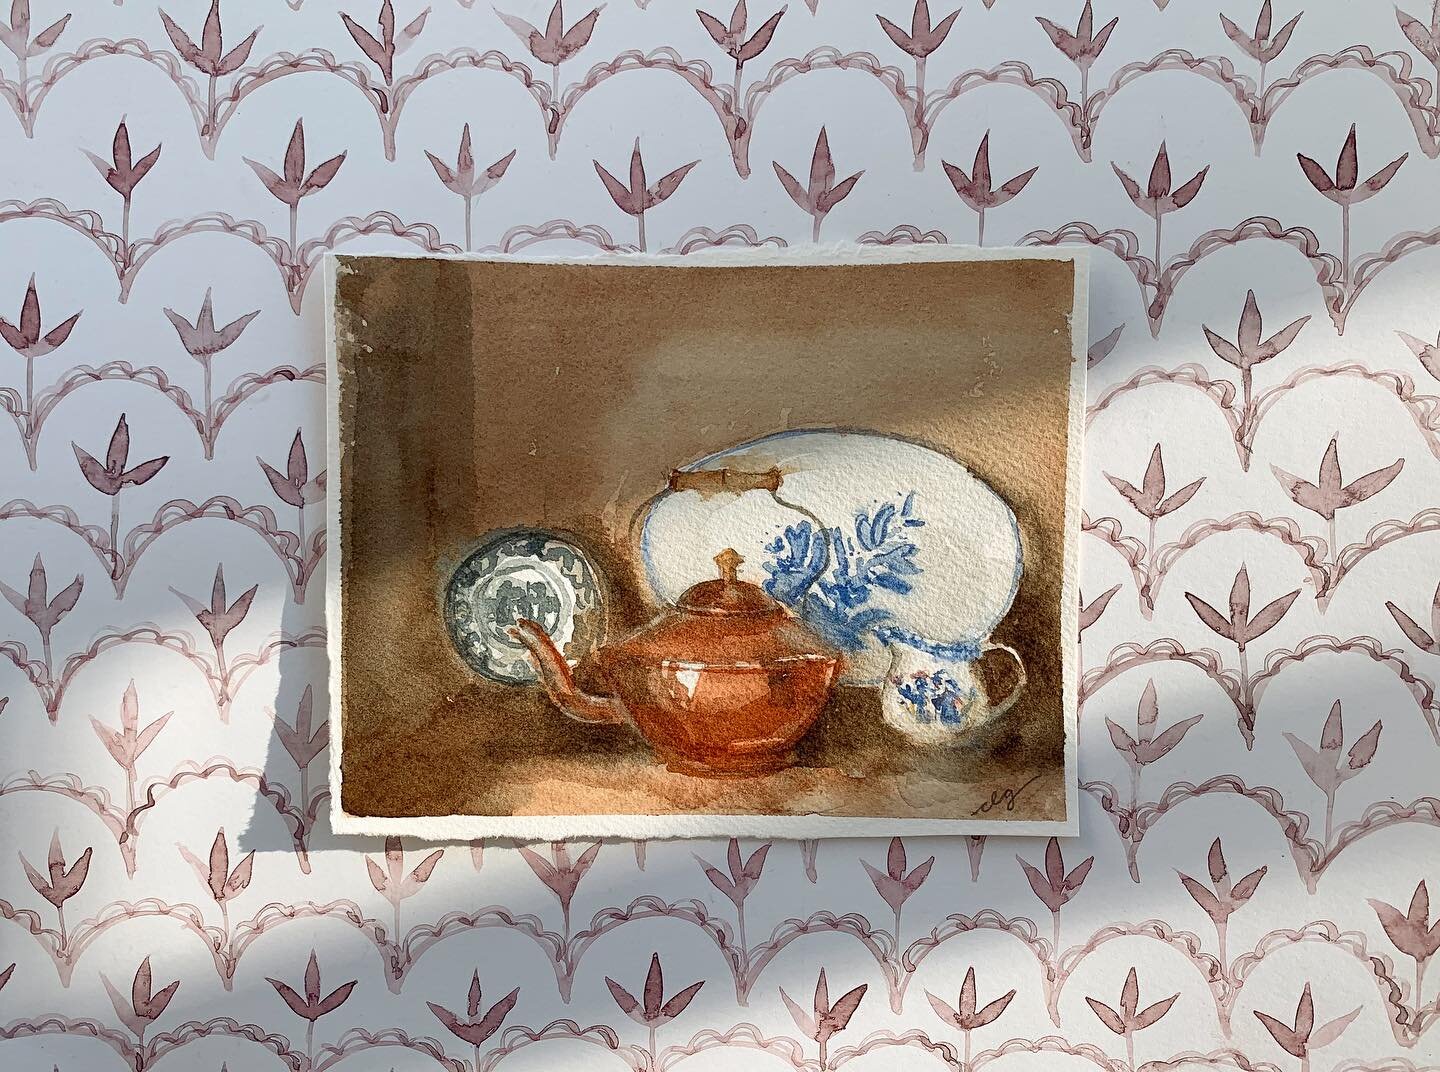 February, a tea kettle love story 🫖
I&rsquo;ll Put a Brew On | 9x12 layered watercolor on paper | The Home Collection No. 2
.
Pfaltzgraff lovers this one&rsquo;s for you! This scene on my antique hutch hints at my daily habit of afternoon tea and lo